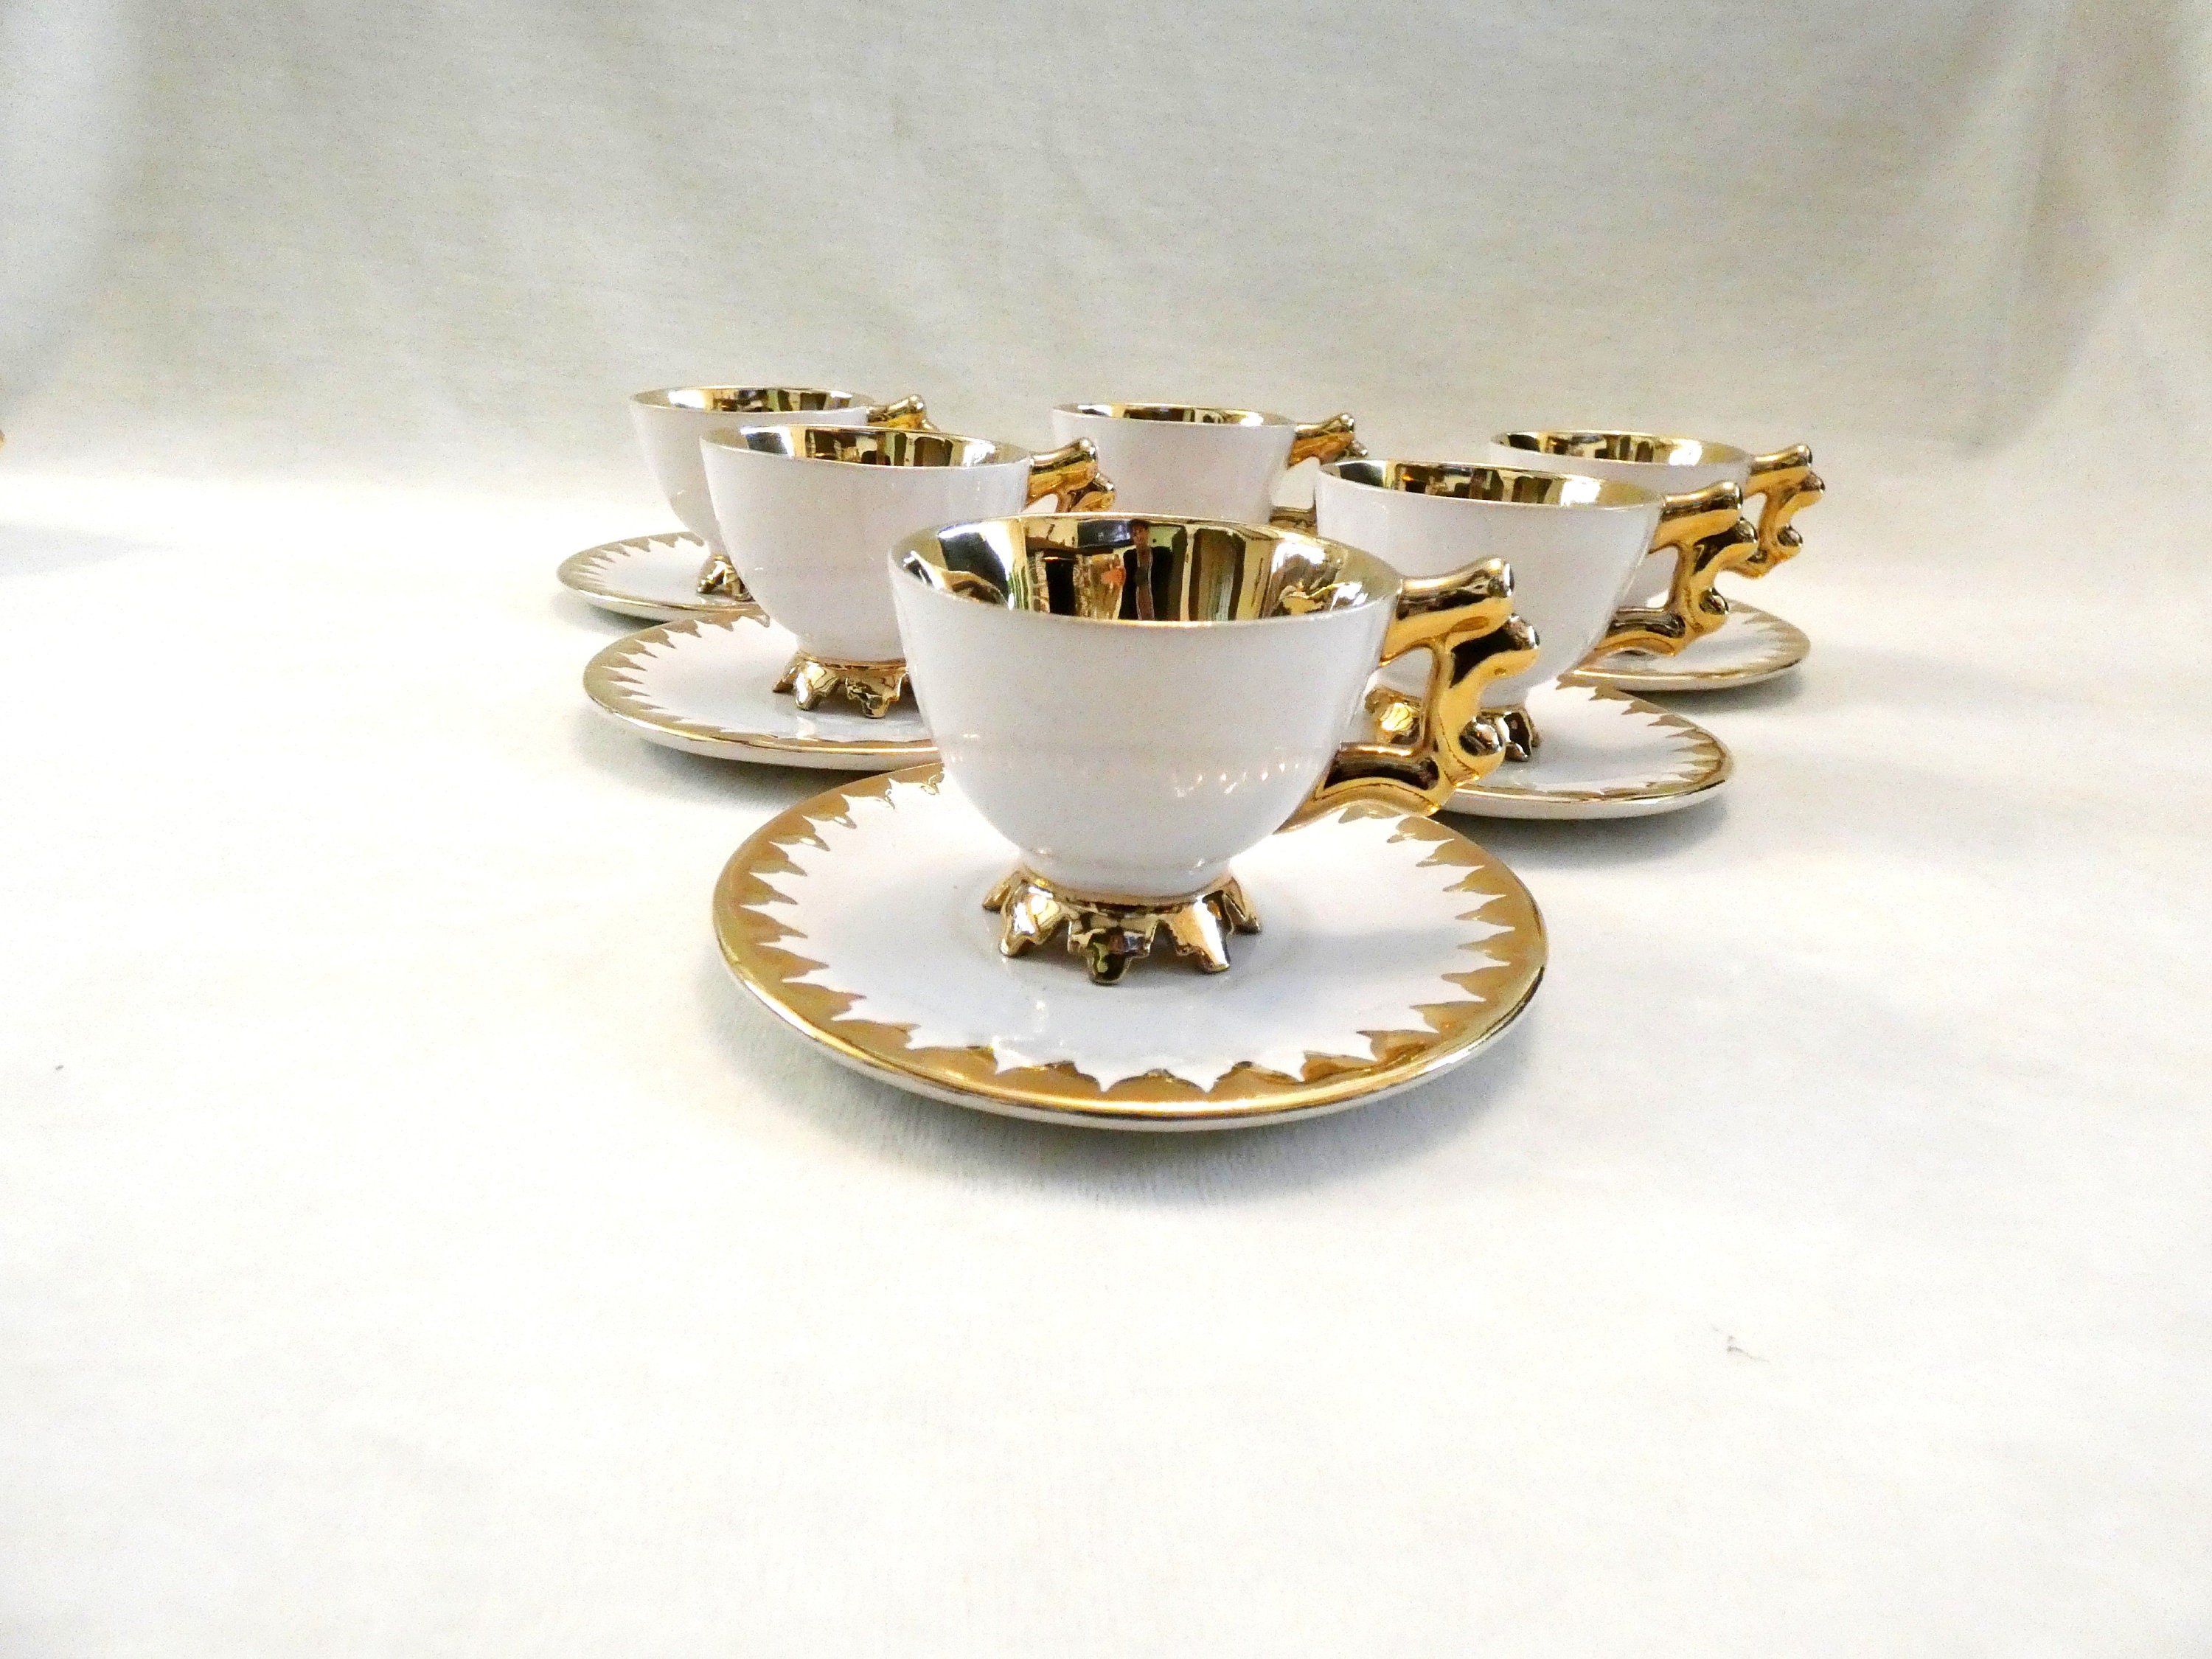 authentic made in italy espresso shot glasses w/gold tone handles